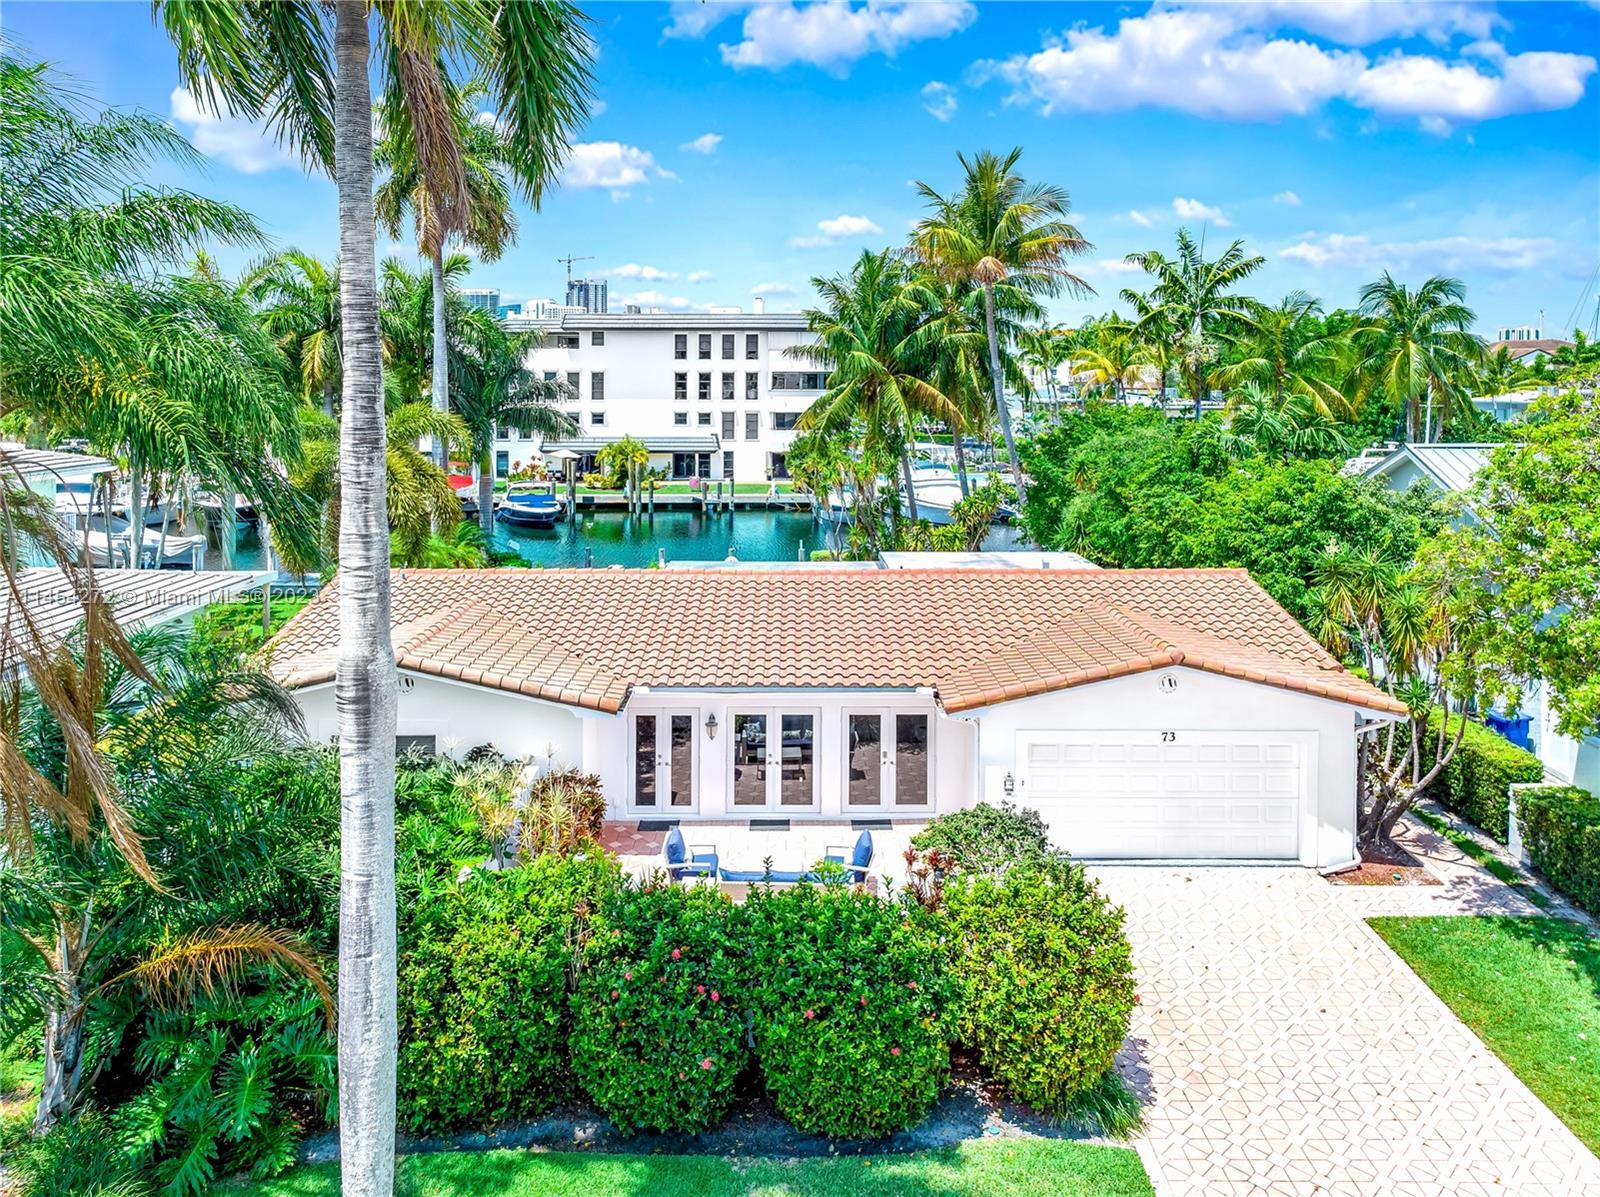 Waterfront mid-century ranch located within the luxurious Las Olas Isles. A widened street, higher e